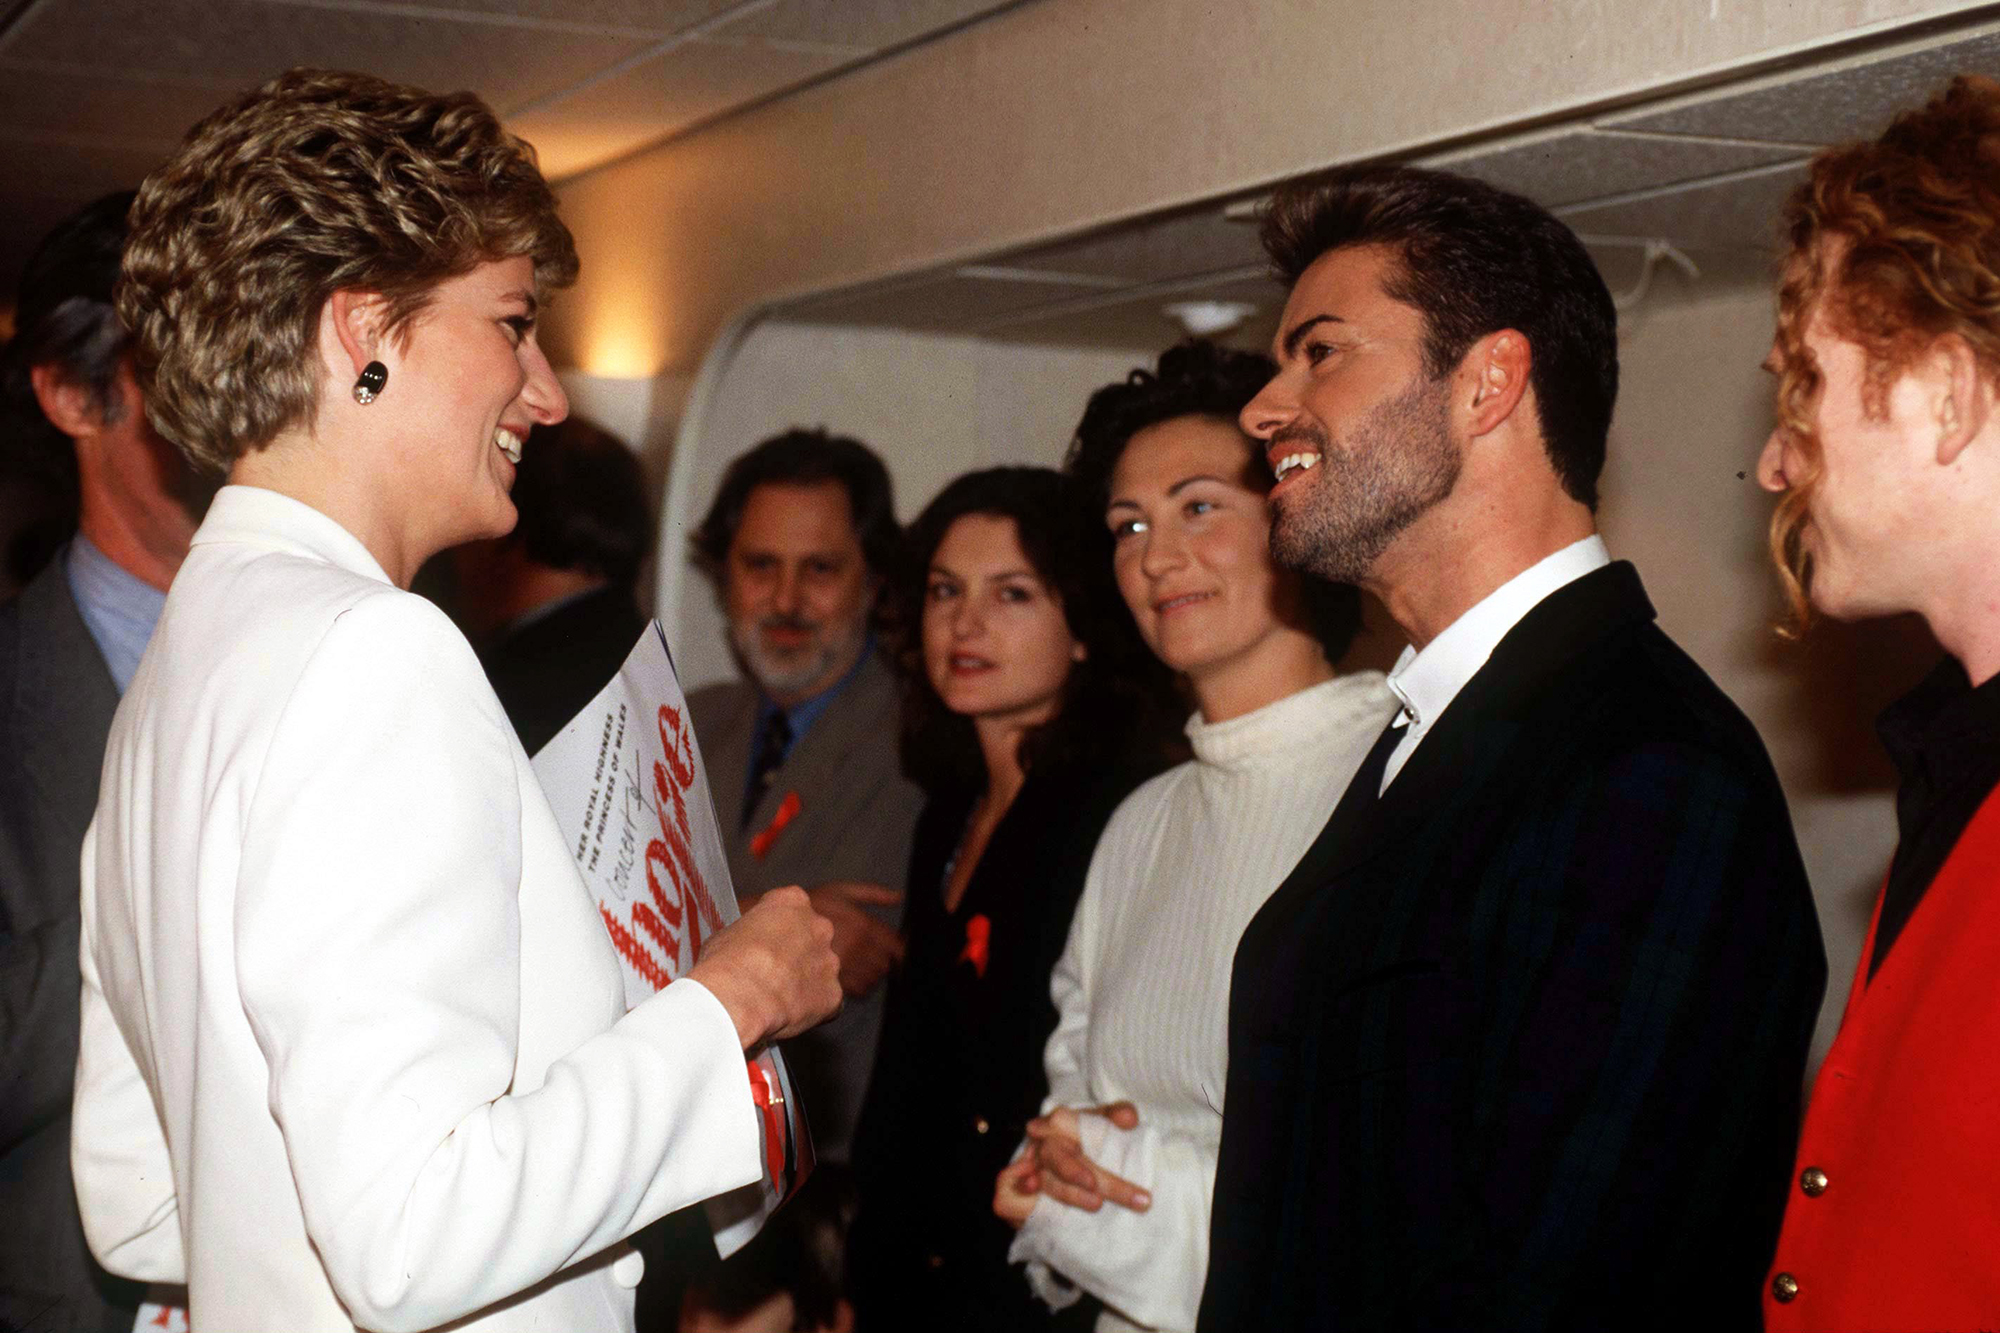 Princess Diana speaks with George Michael at The World Aids Day Annual "Concert of Hope" at Wembley Arena in London on Dec. 1 1993.